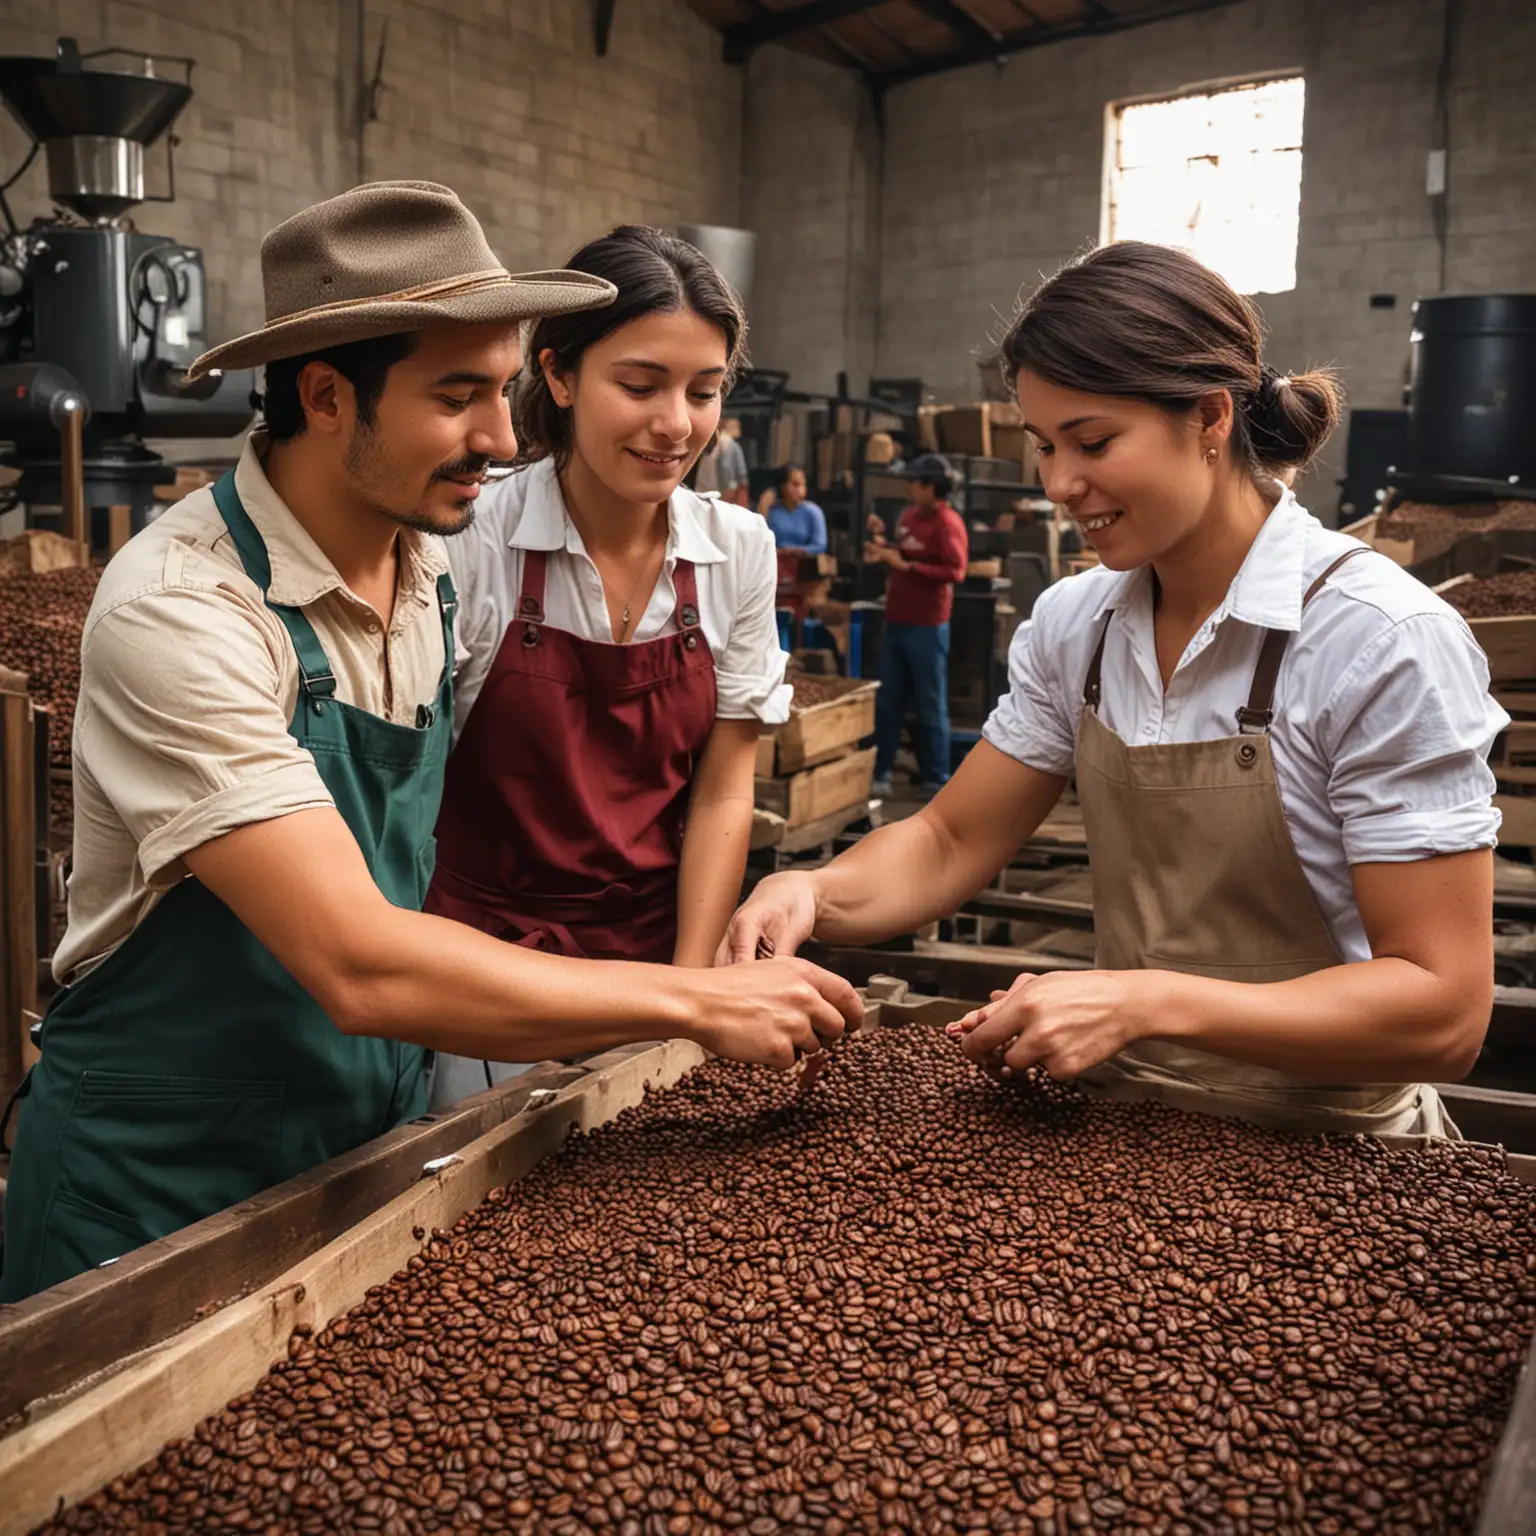 Show me a couple of colombian farmers carefully selecting coffee beans in a coffee warehouse. Show a coffee roaster machine by their side

